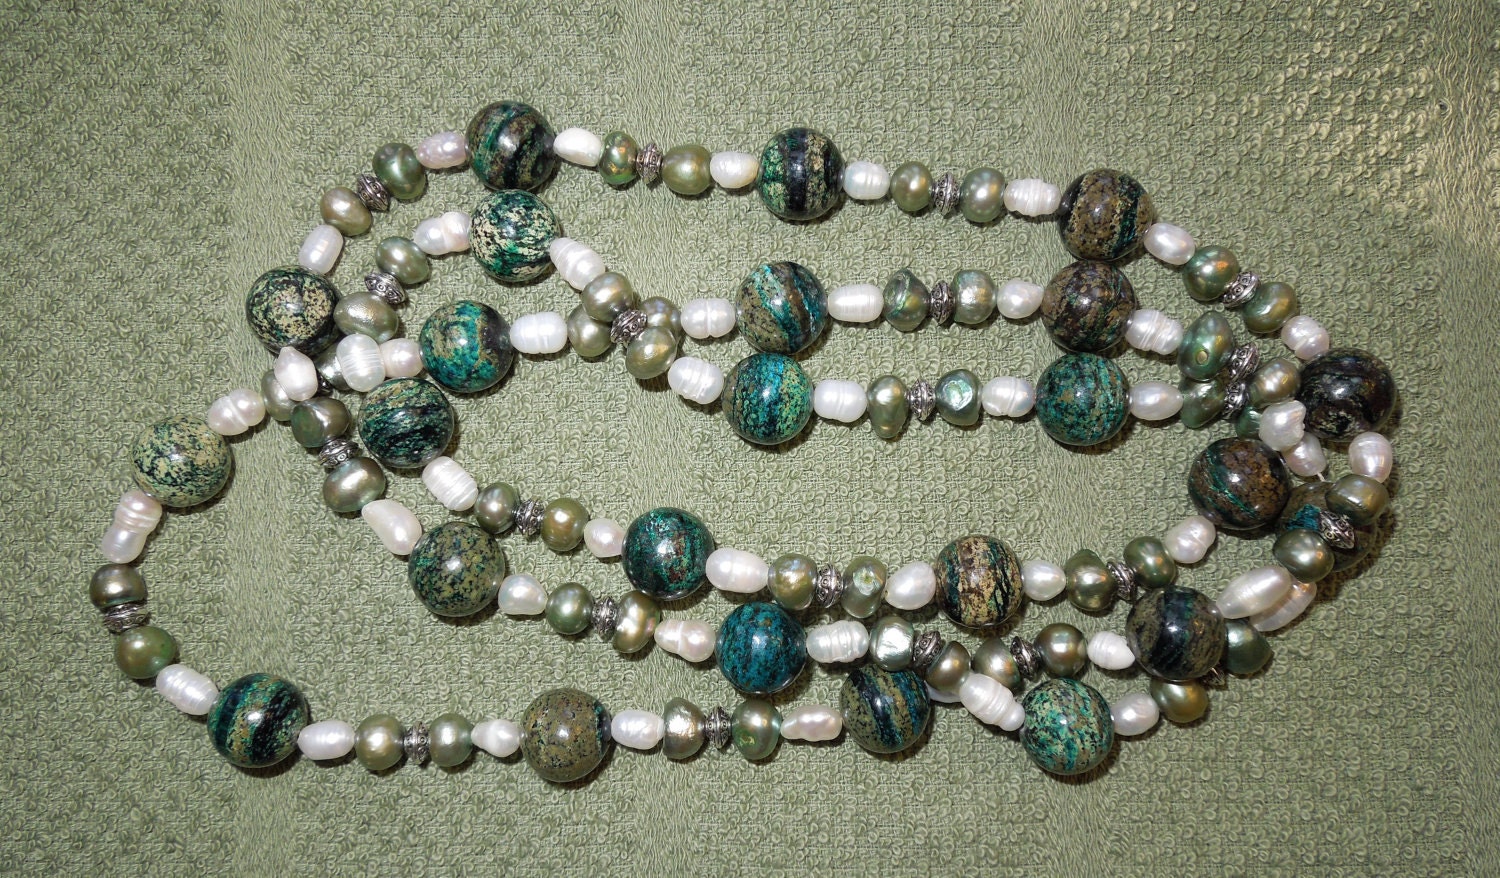 Long Green Stone Necklace Item 1110